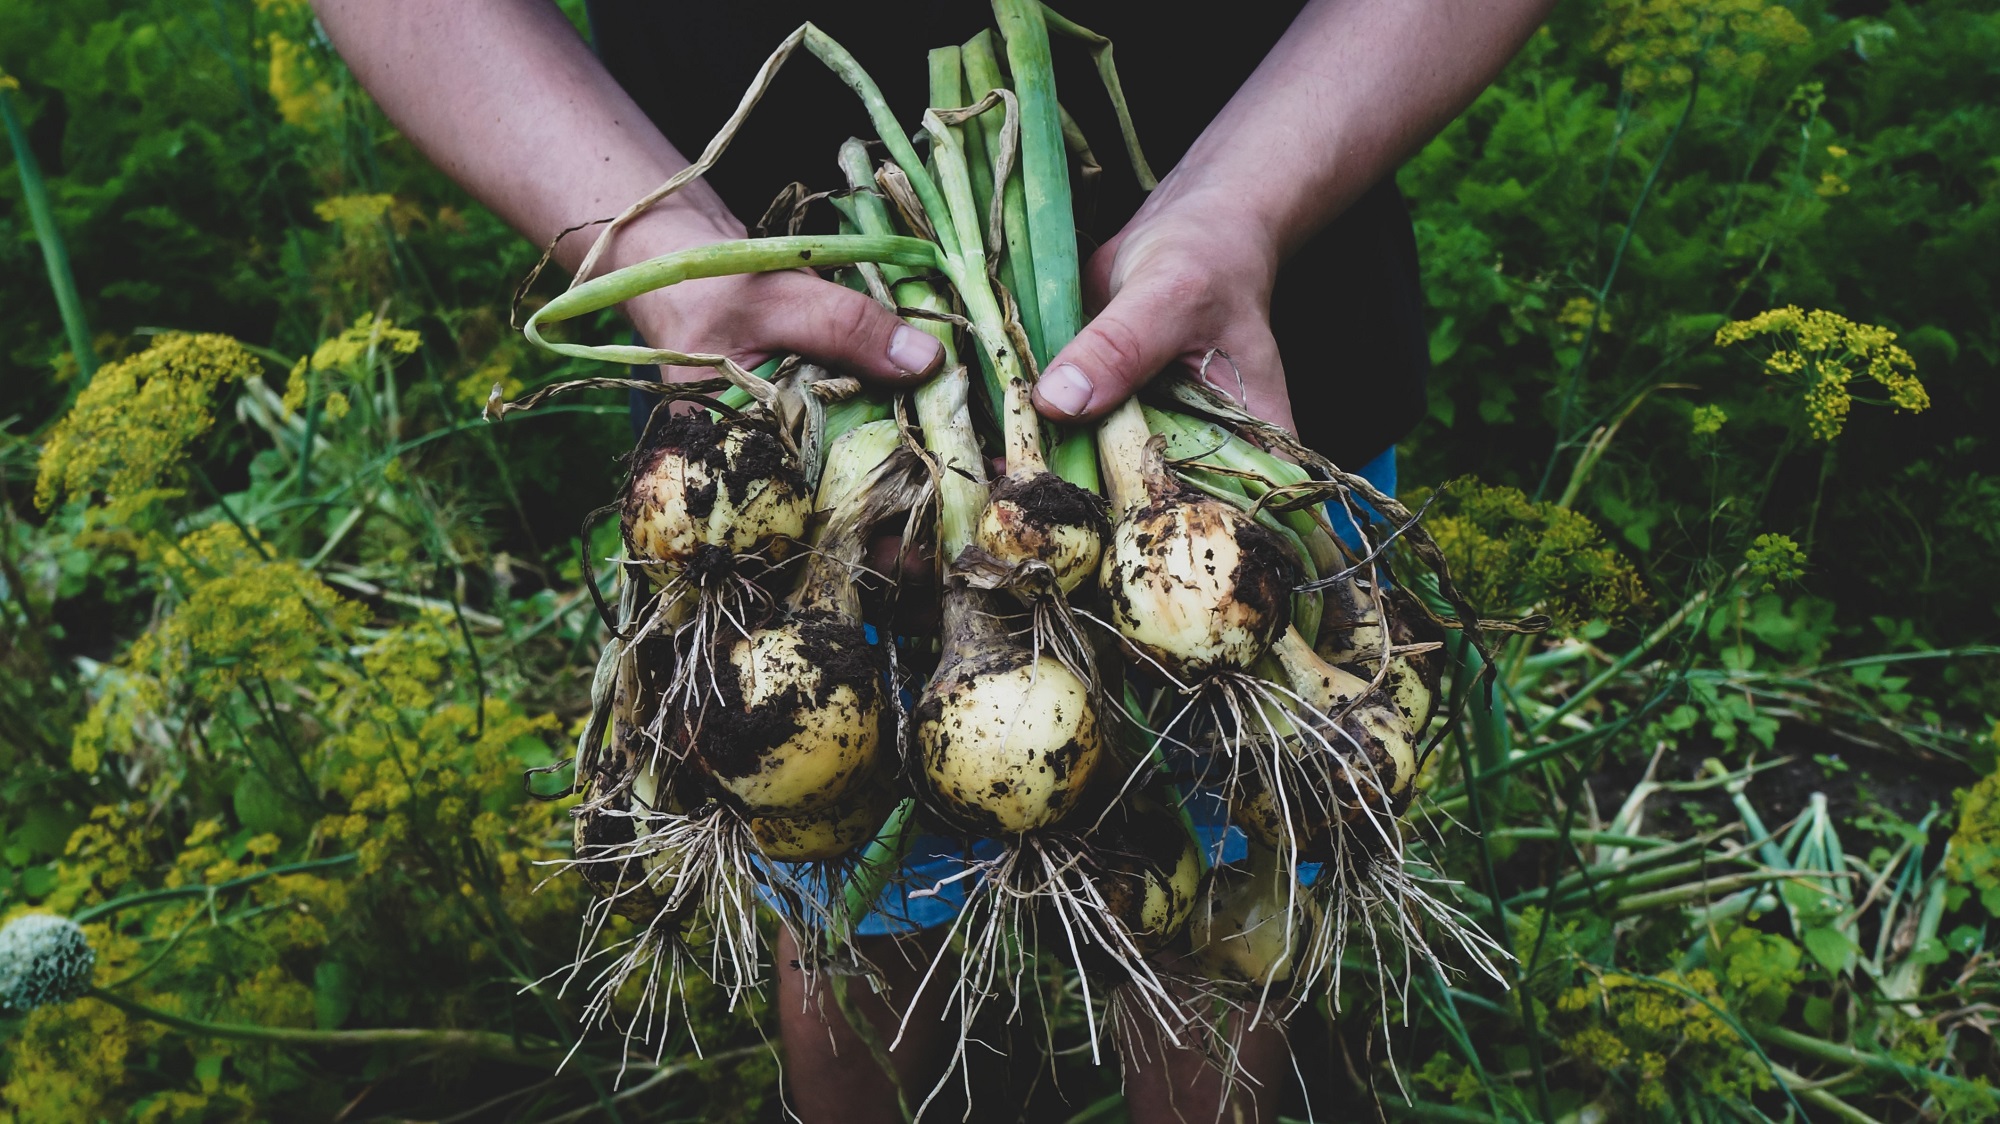 Agroecological farming improves resilience to climactic and other shocks. 